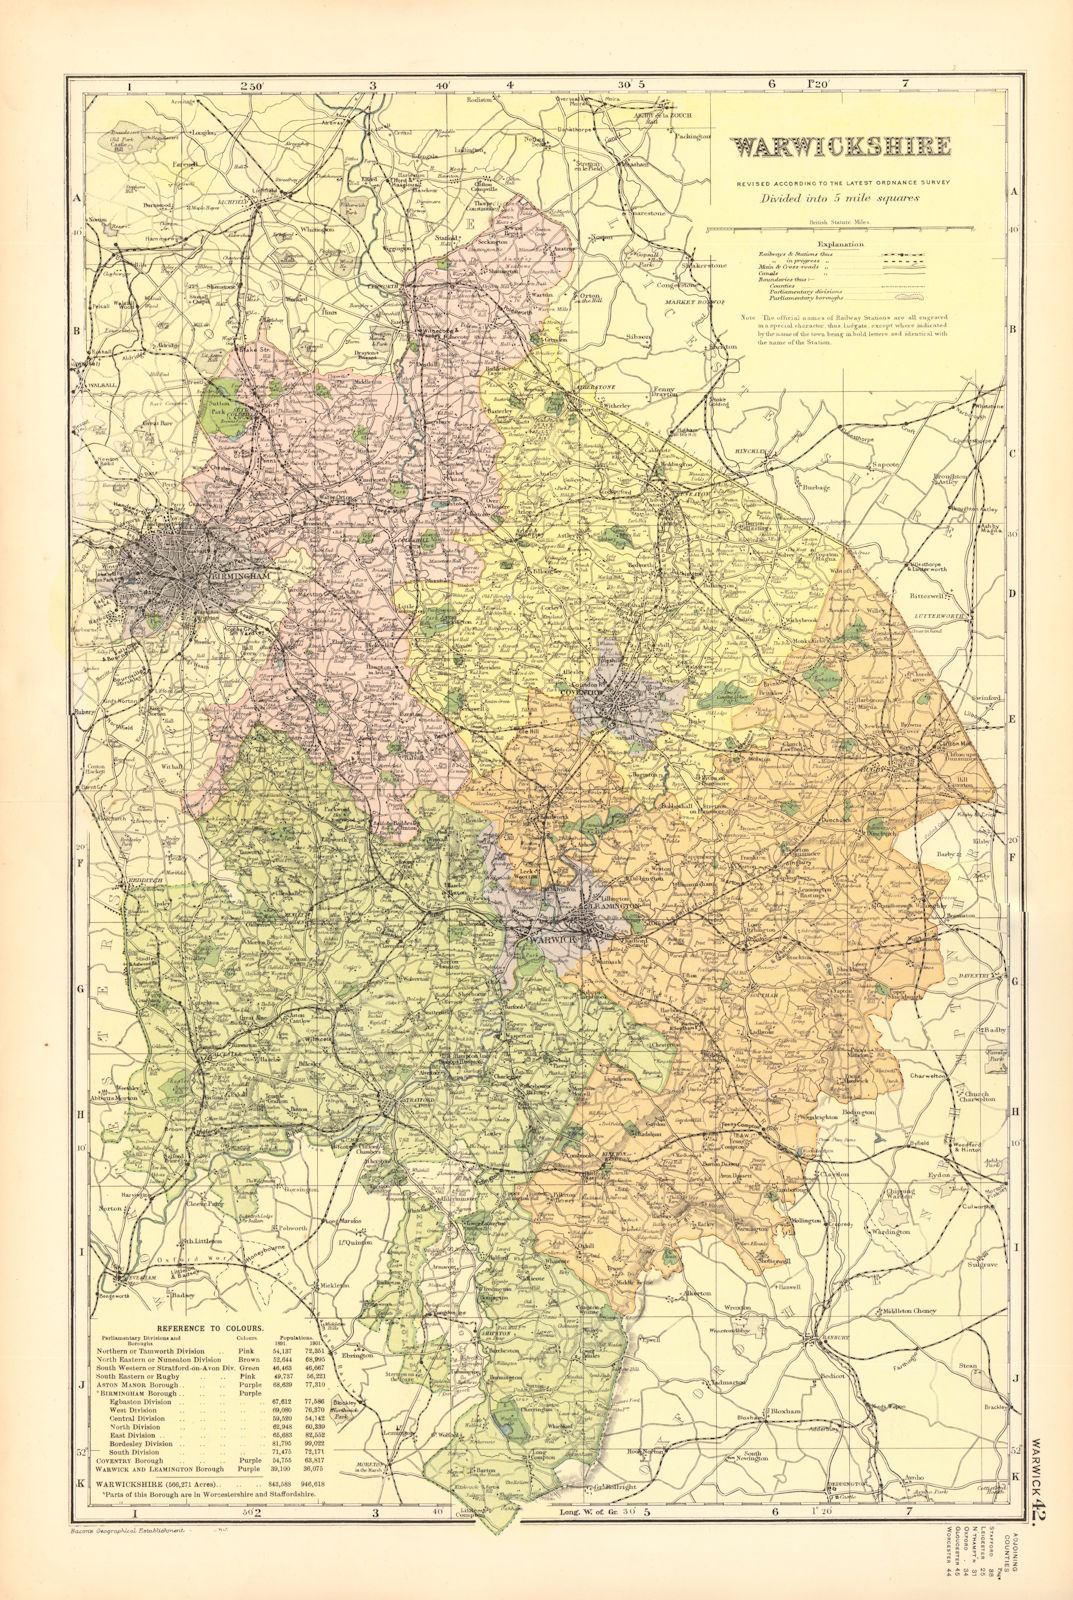 WARWICKSHIRE. Showing Parliamentary divisions, boroughs & parks. BACON 1904 map